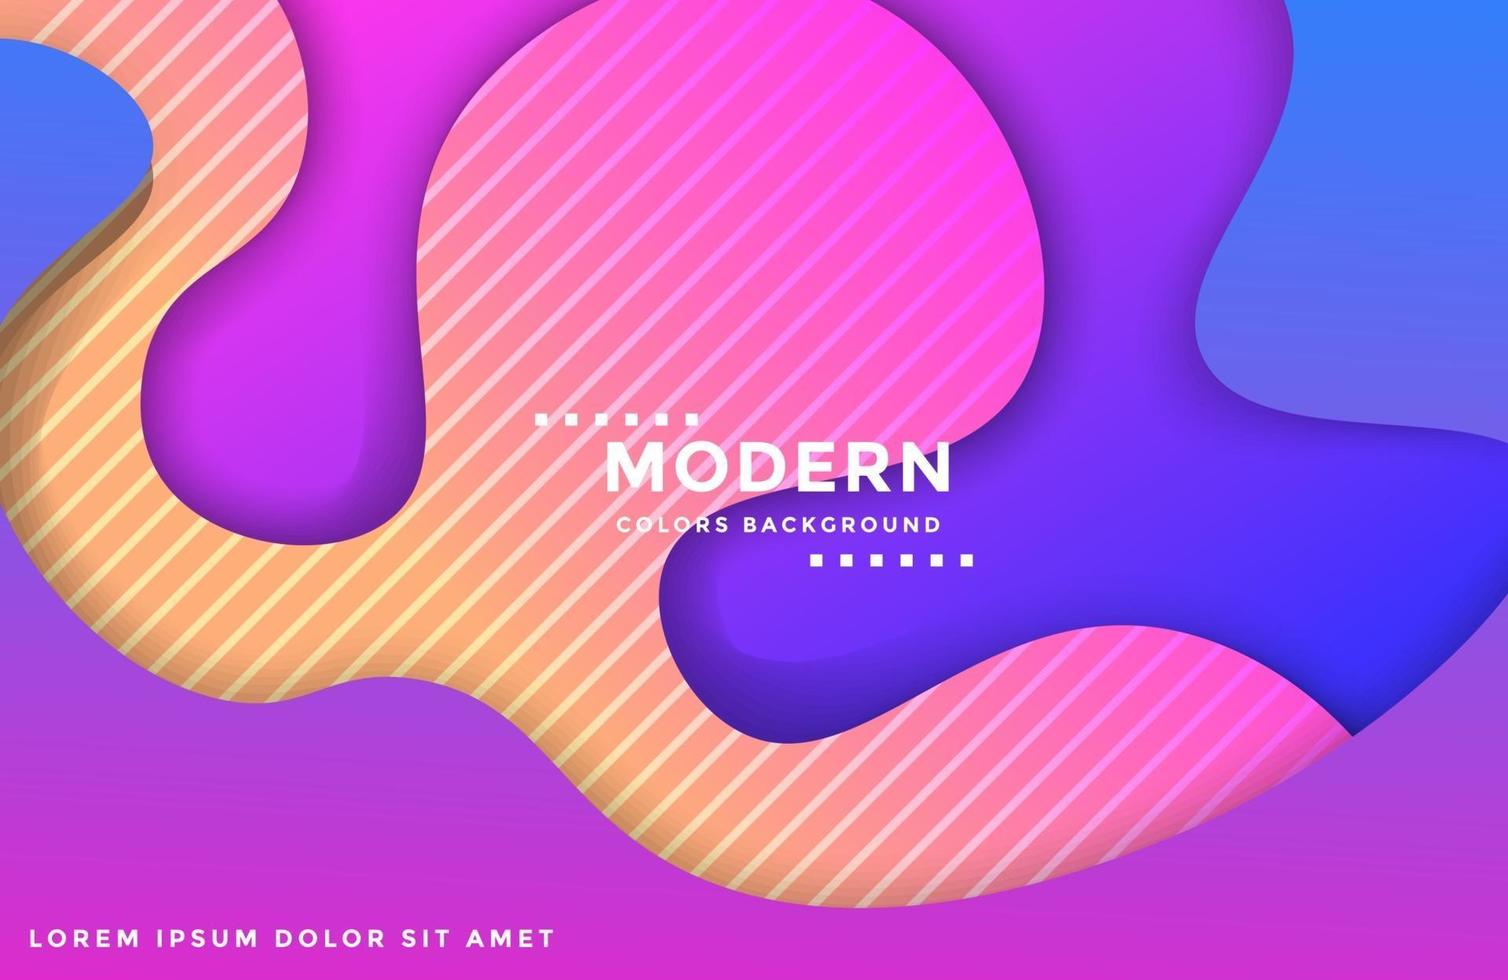 Wavy liquid shape on trendy gradient color abstract background vector